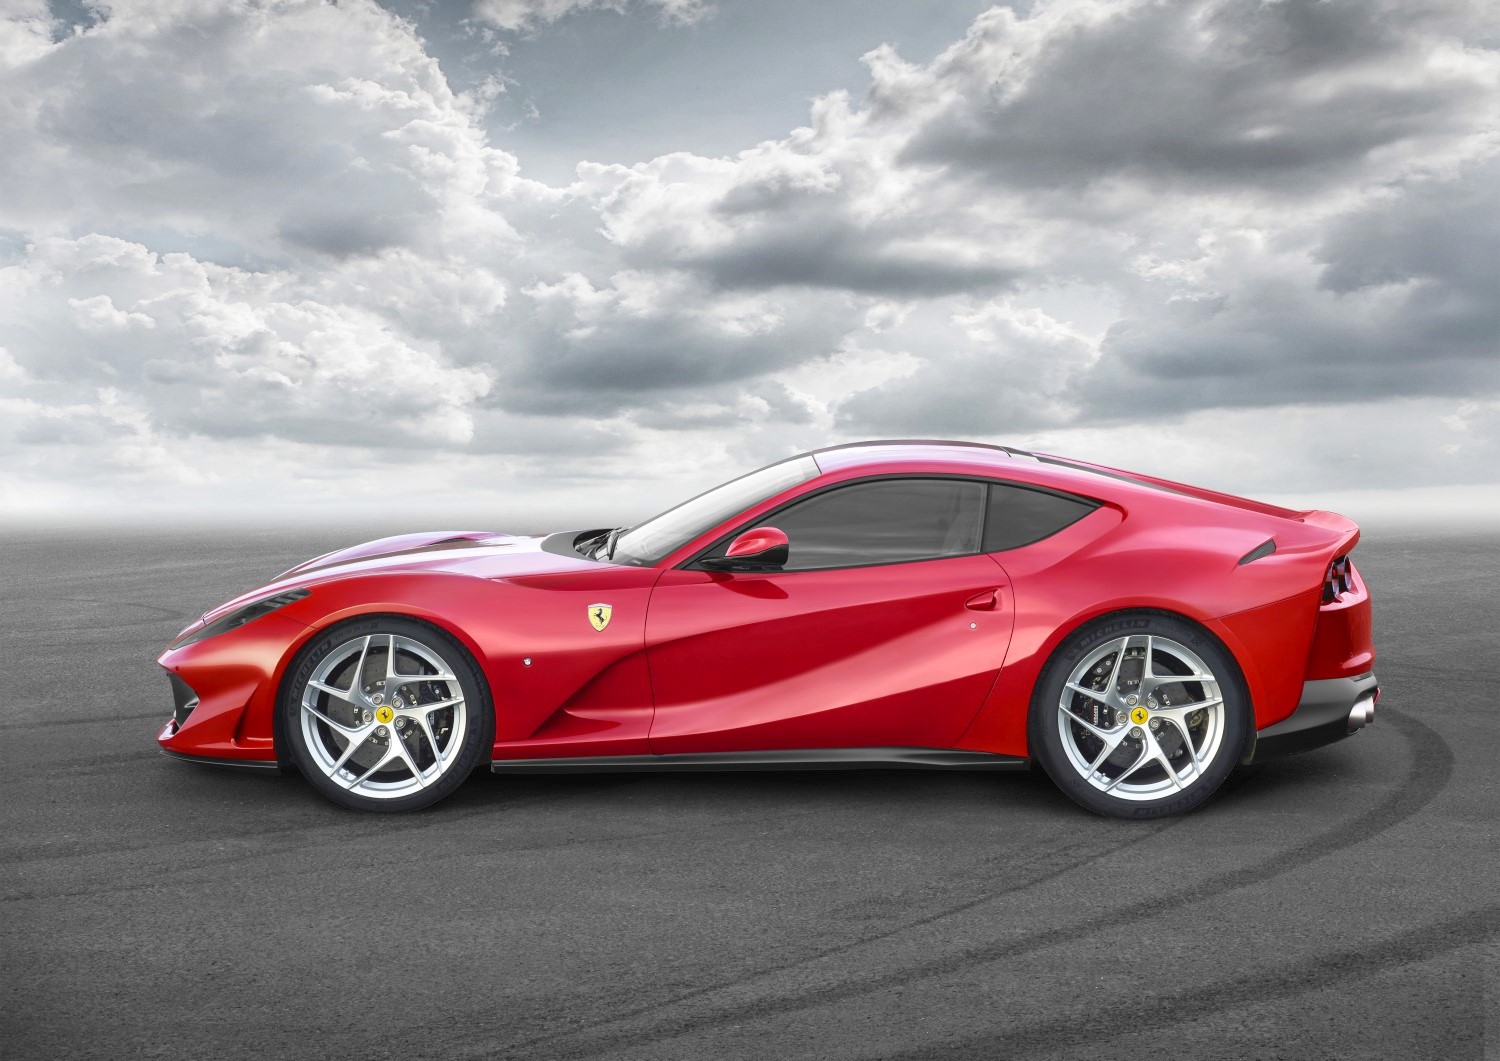 The Waiting List For Ferrari's Newest 12-Cylinder Car, The 812 Superfast, Already Extends Beyond 2018